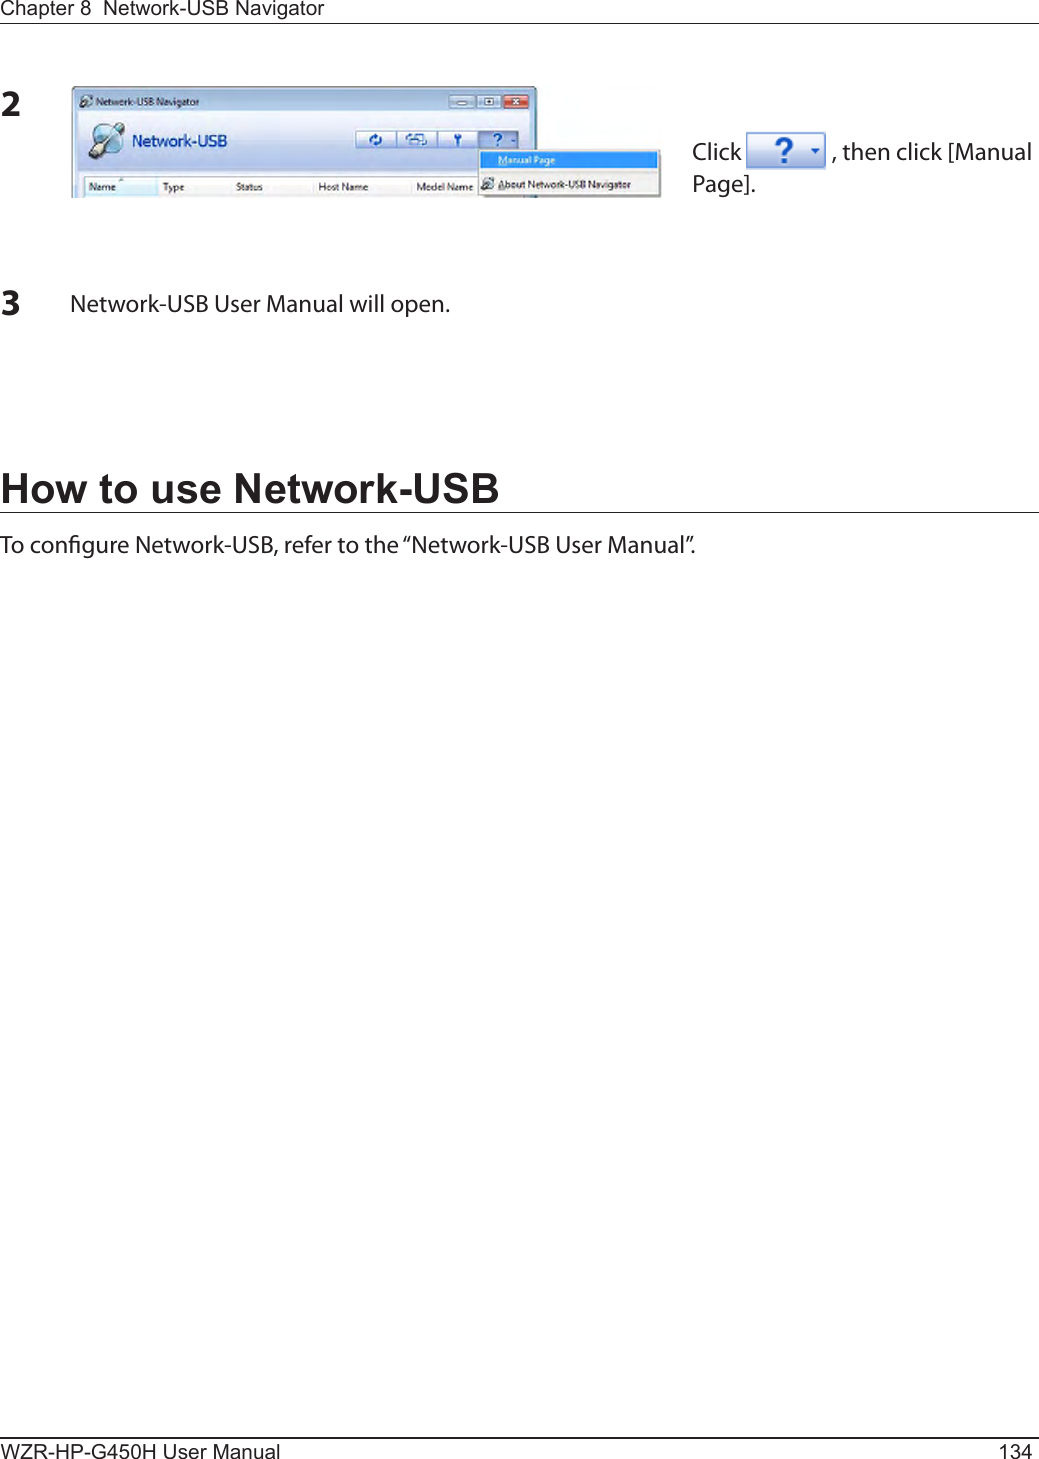 WZR-HP-G450H User Manual 134Chapter 8  Network-USB NavigatorHow to use Network-USBTo congure Network-USB, refer to the “Network-USB User Manual”.2Click   , then click [Manual Page]. 3Network-USB User Manual will open.